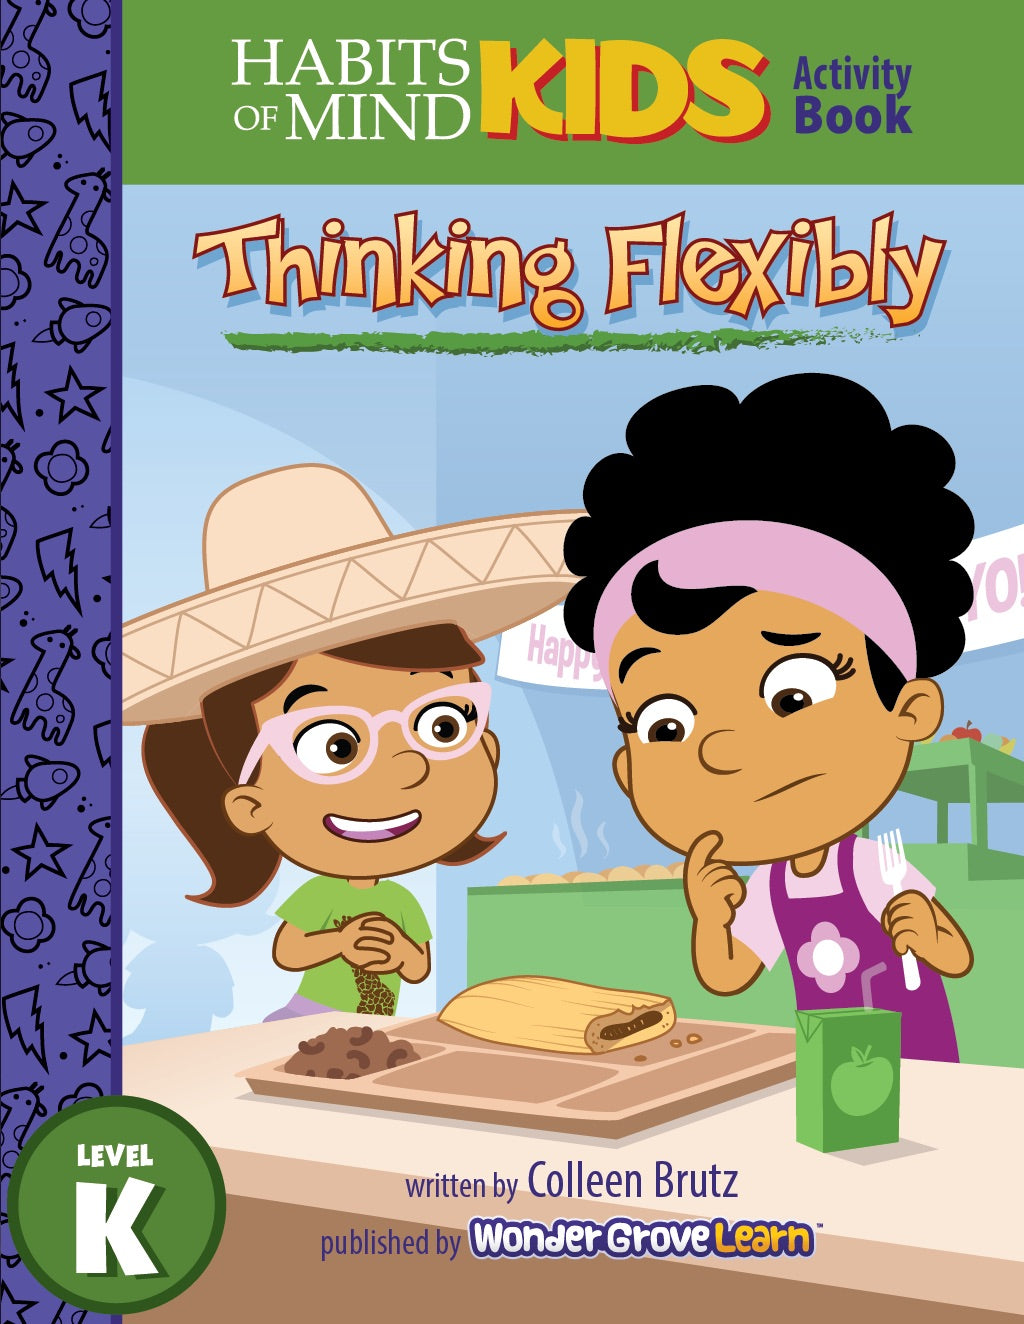 Thinking Flexibly: A Habits of Mind Story for Kindergarten